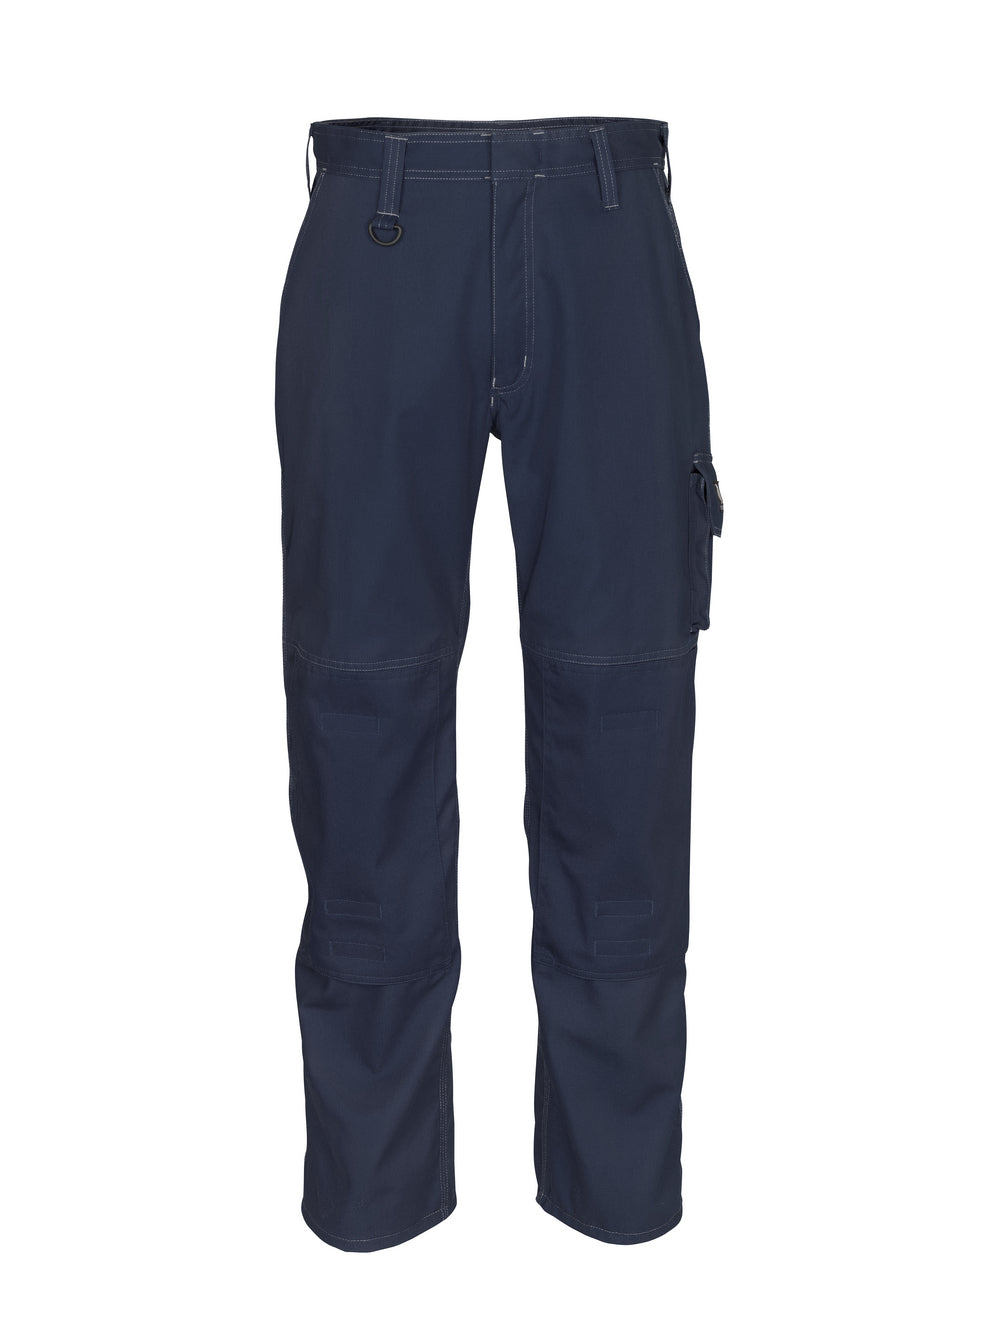 MASCOT®INDUSTRY Trousers with kneepad pockets Pittsburgh 10579 - DaltonSafety